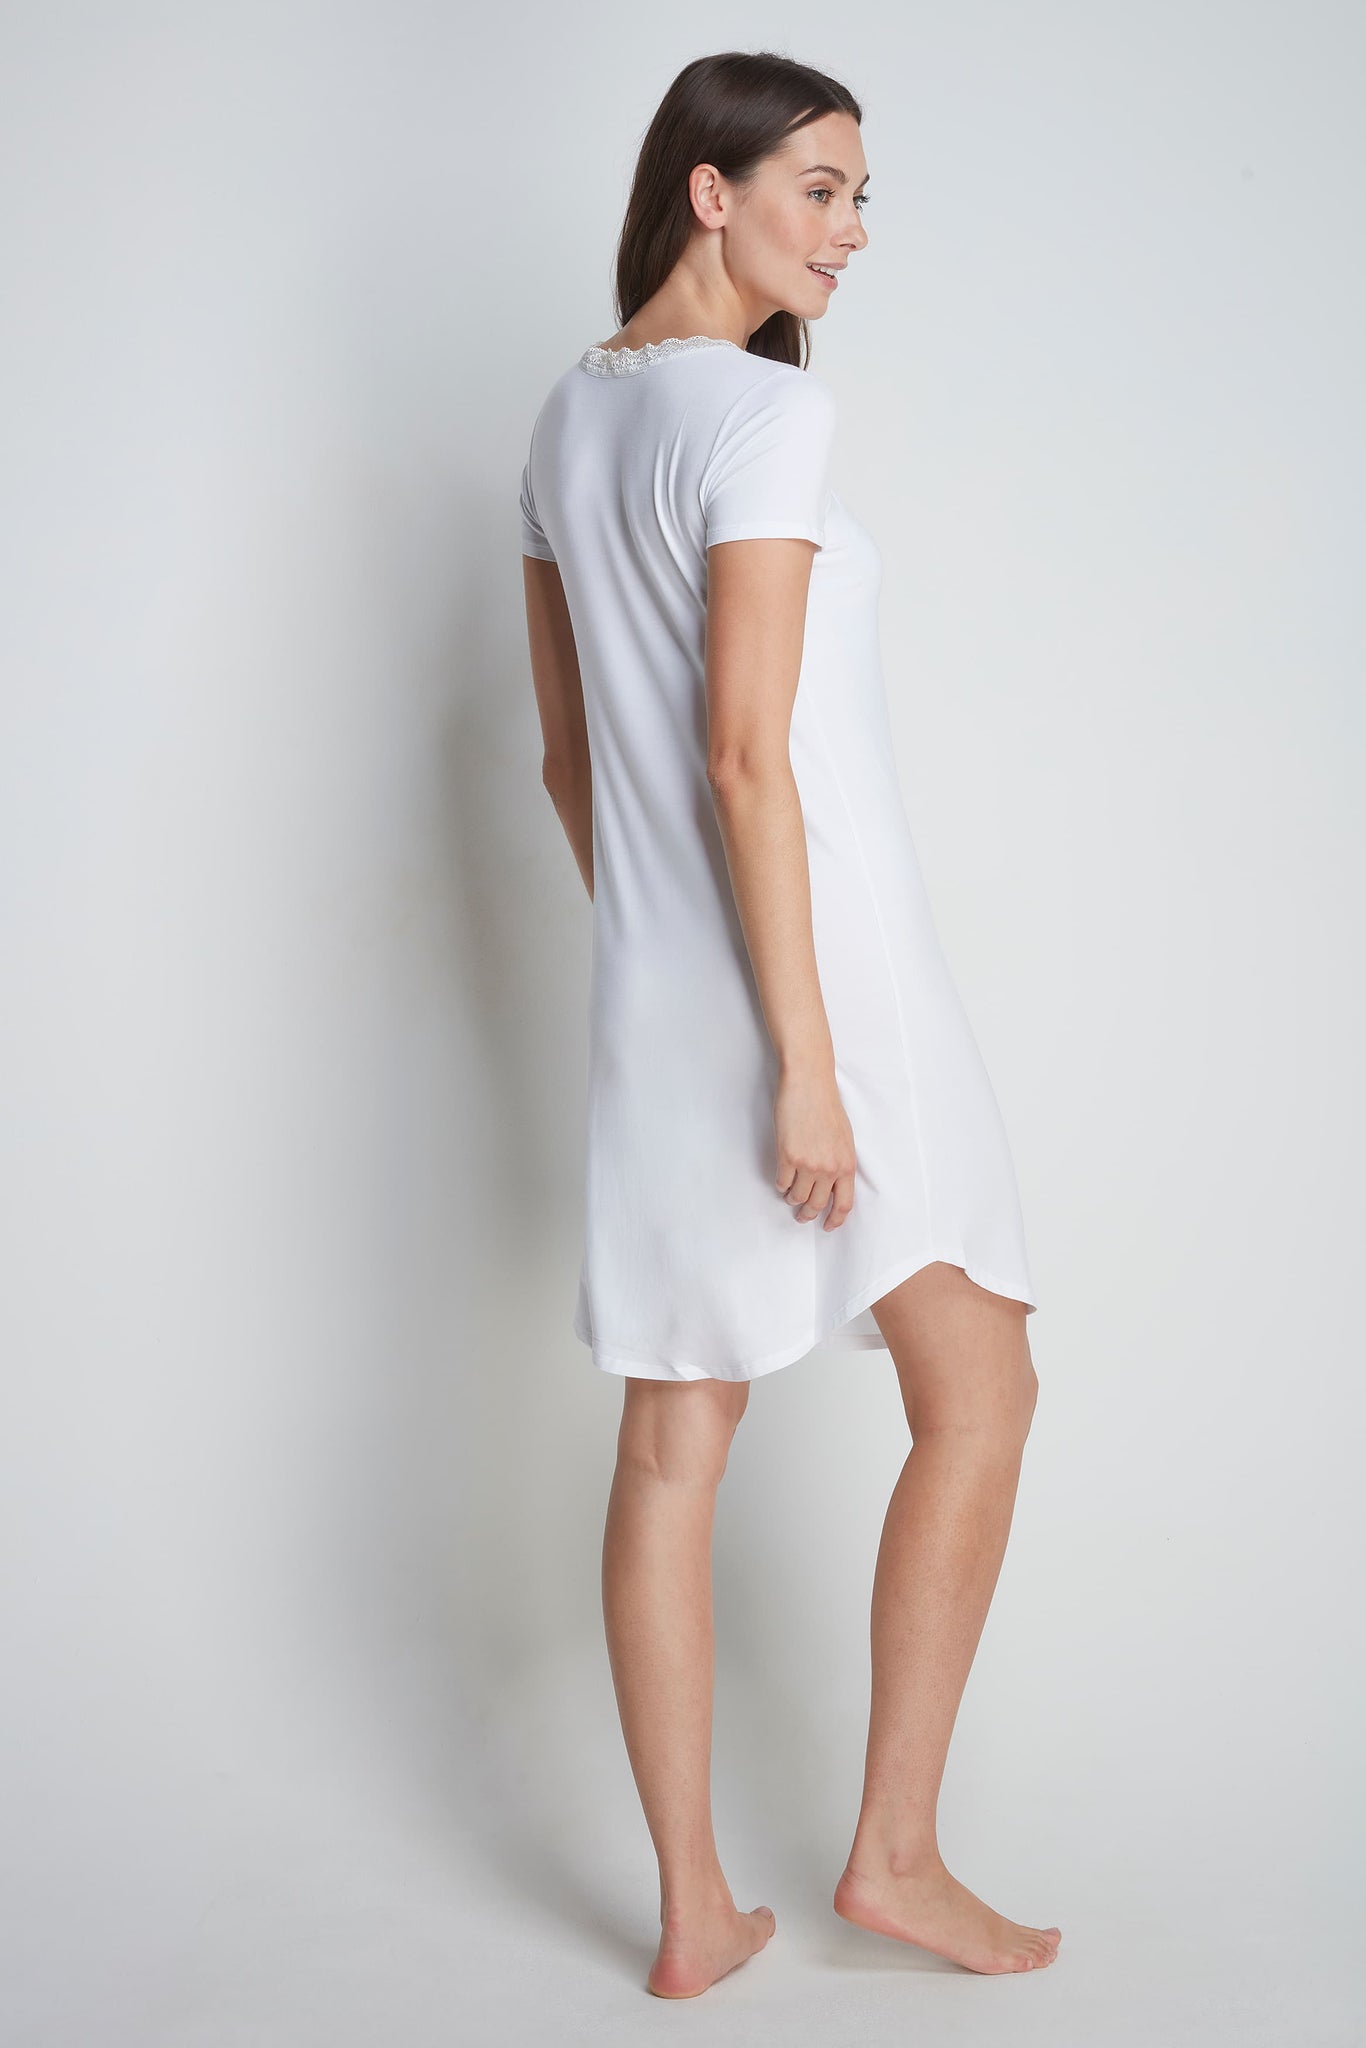 Women's Luxury White Micro Modal Nightdress by Lavender Hill Clothing